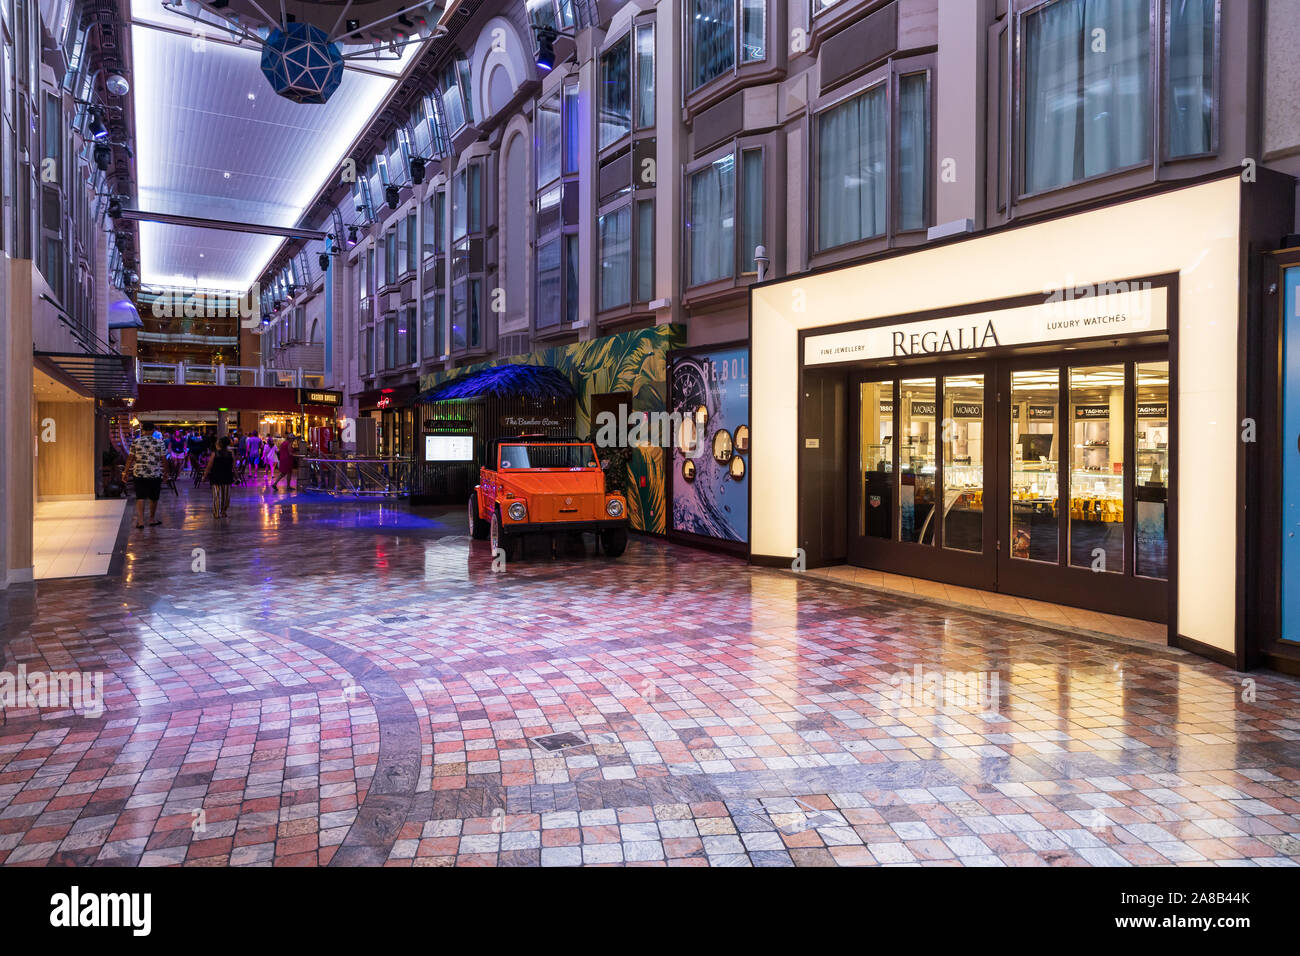 The Royal Promenade, aboard a Royal Caribbean cruise ship, features multiple restaurants and stores to shop in for the guests aboard. Stock Photo